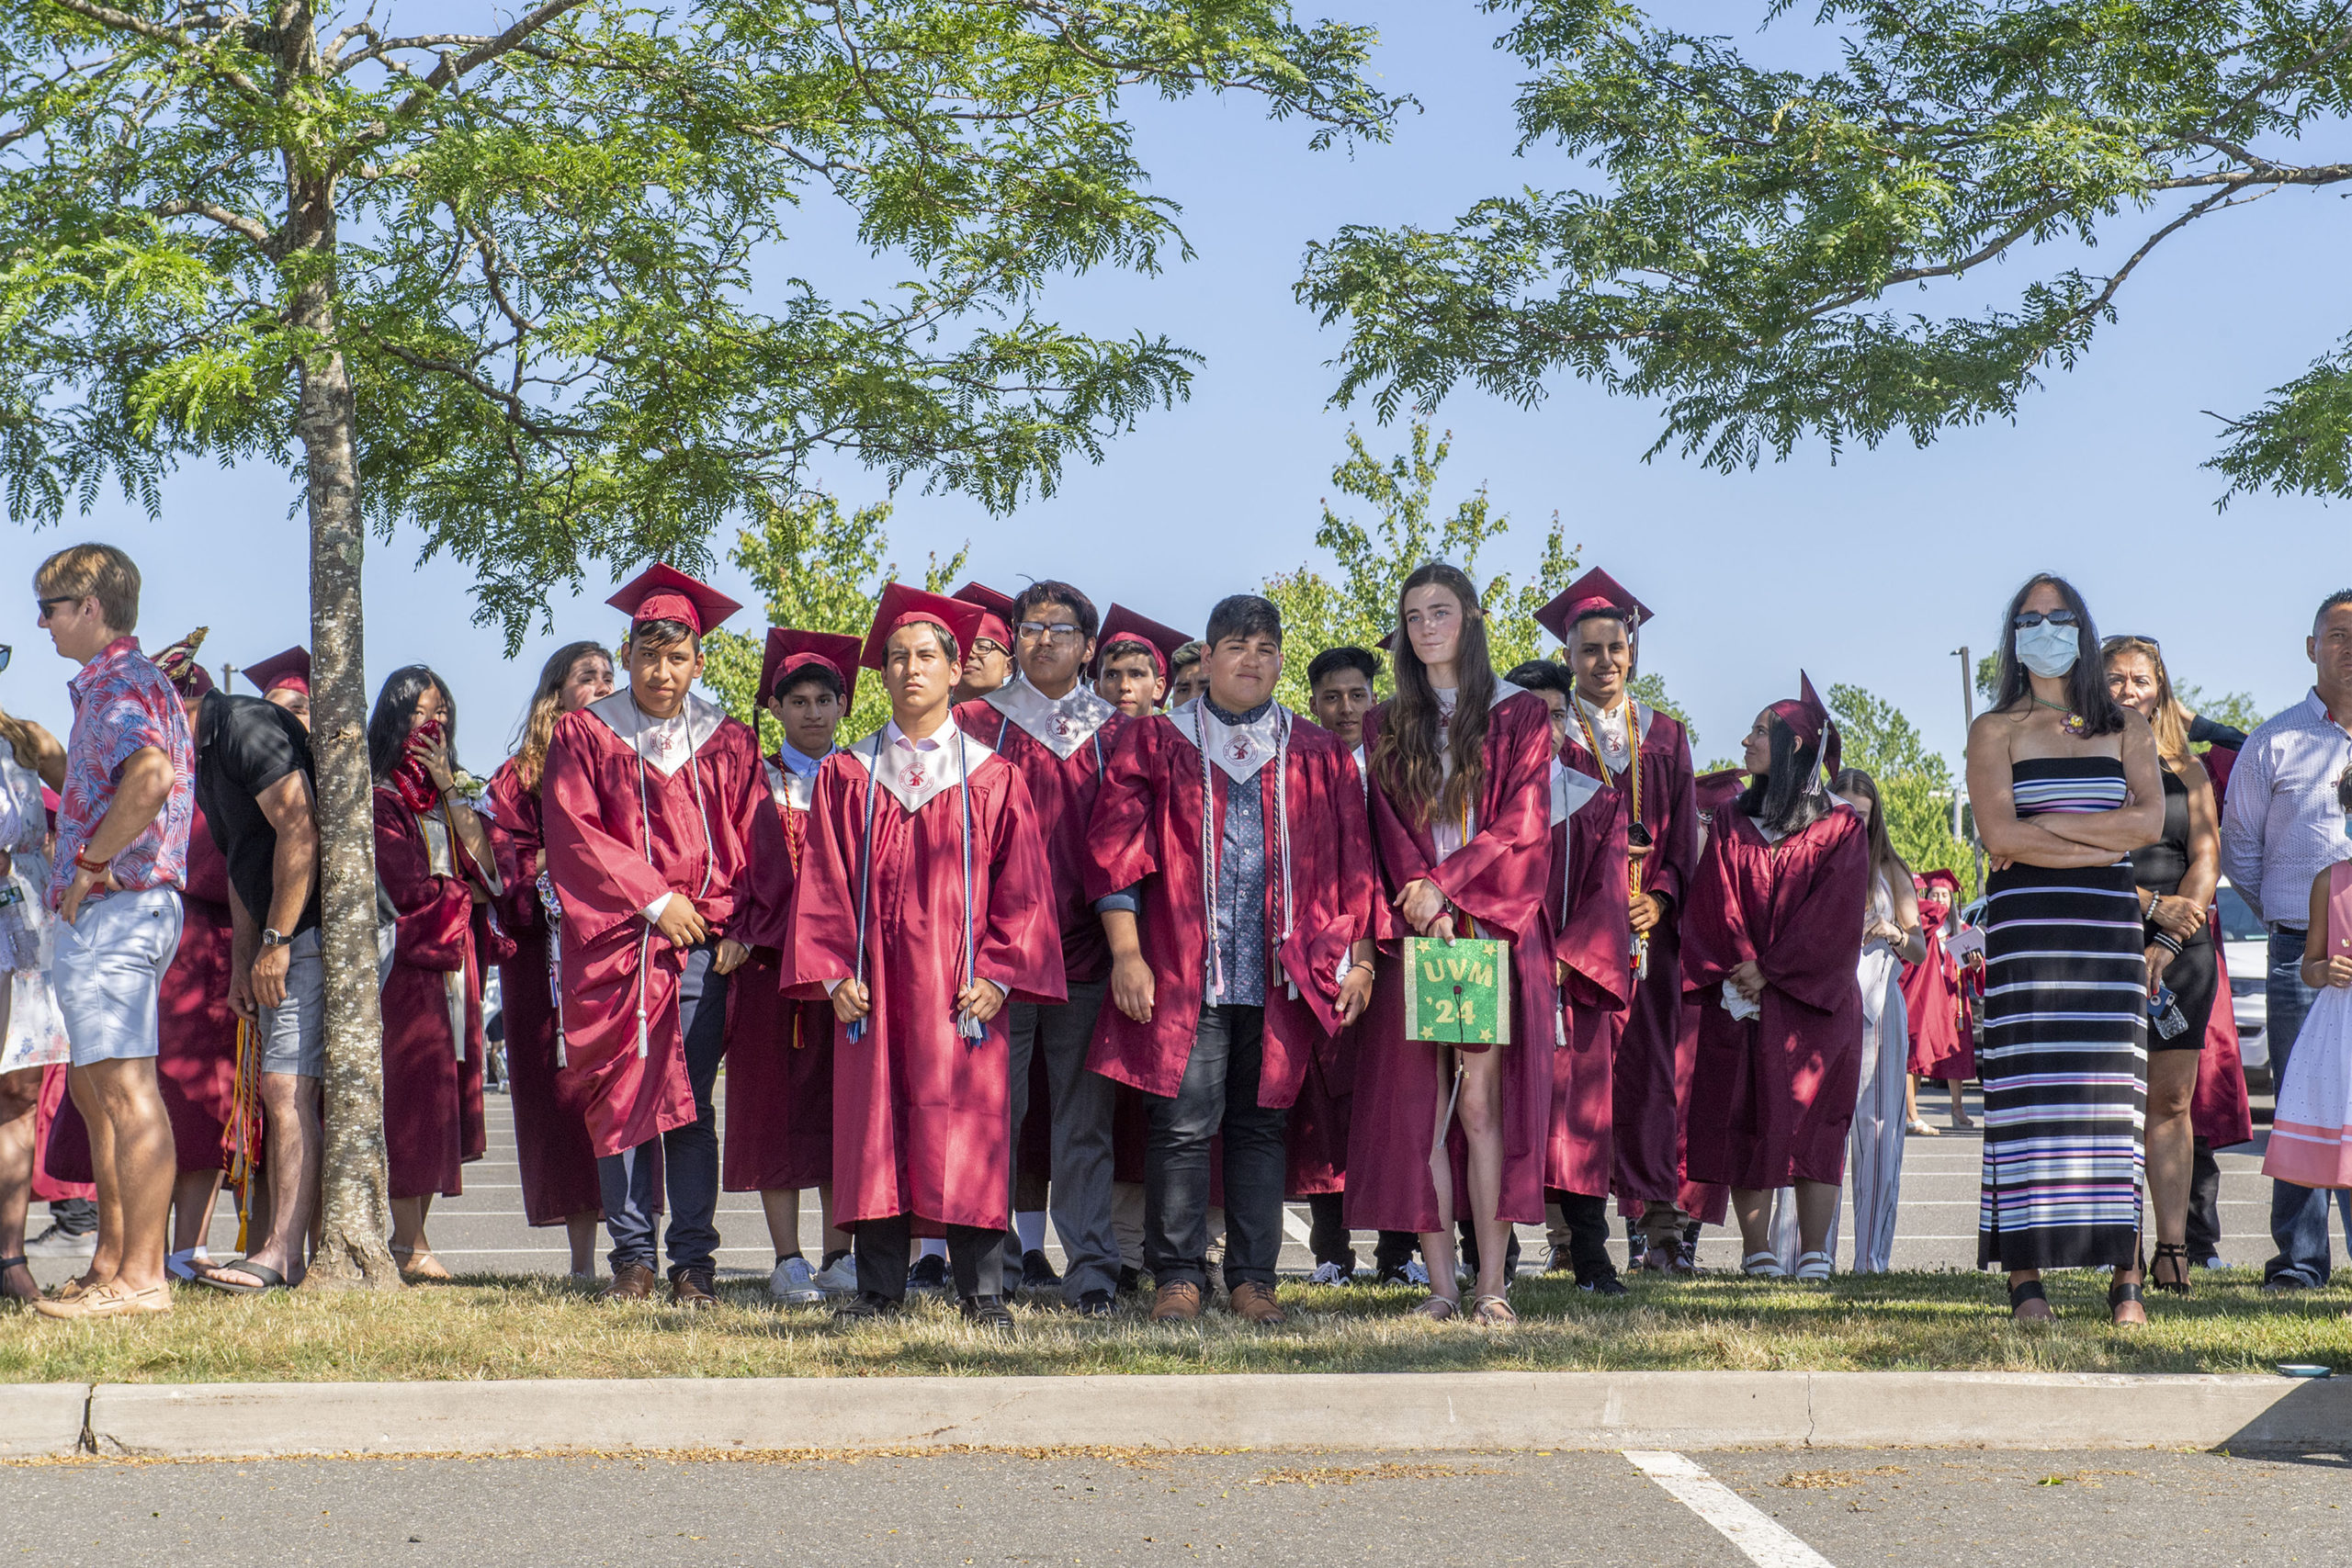 Seniors and their families watched the ceremony from the shade of some trees in the parking lot during the 2020 graduation ceremony at the East Hampton High School on Friday.